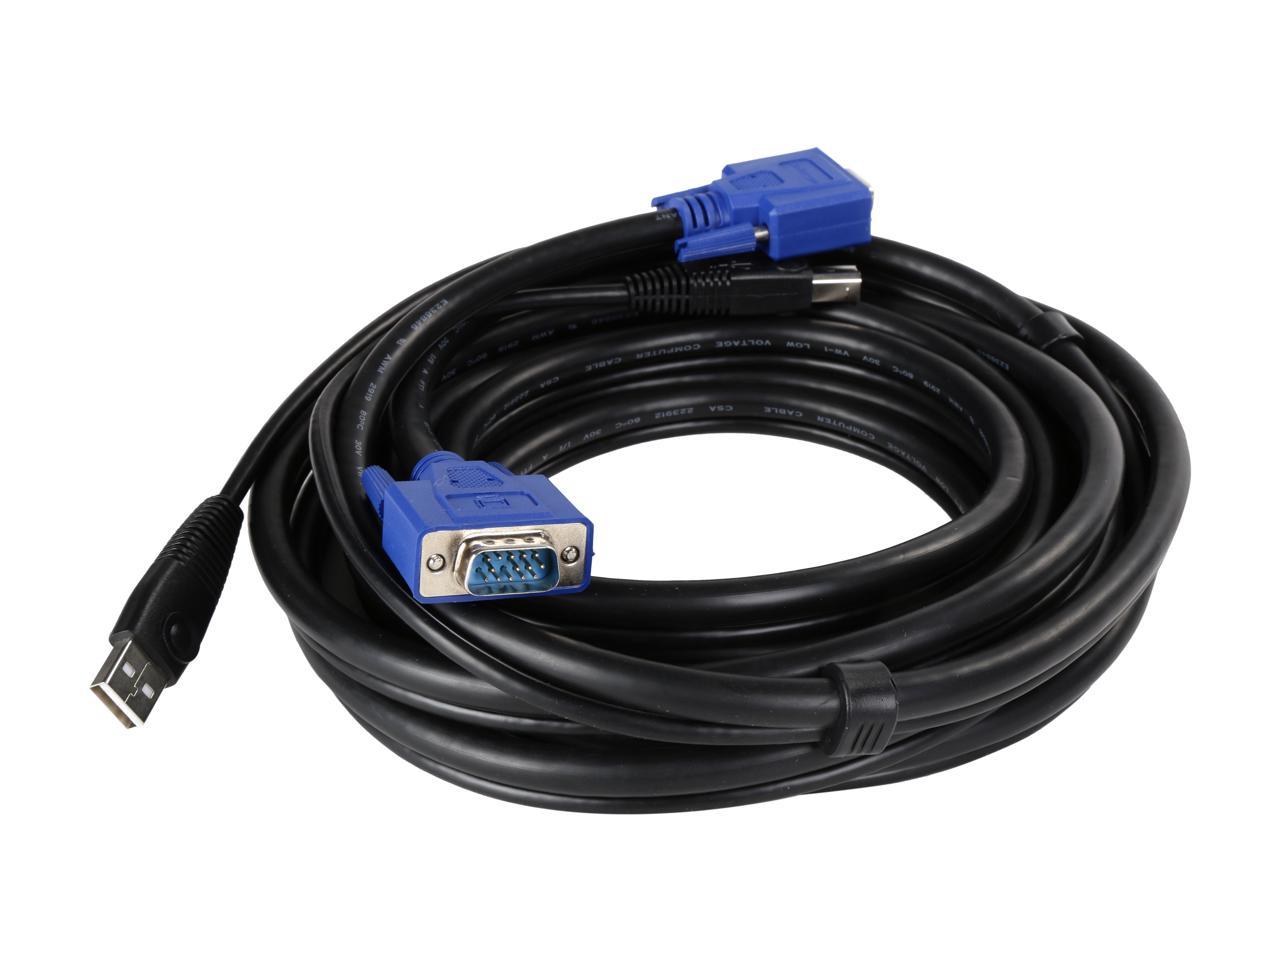 StarTech.com 15 ft. USB+VGA 2-in-1 KVM Switch Cable SVUSB2N1_15 - image 2 of 3